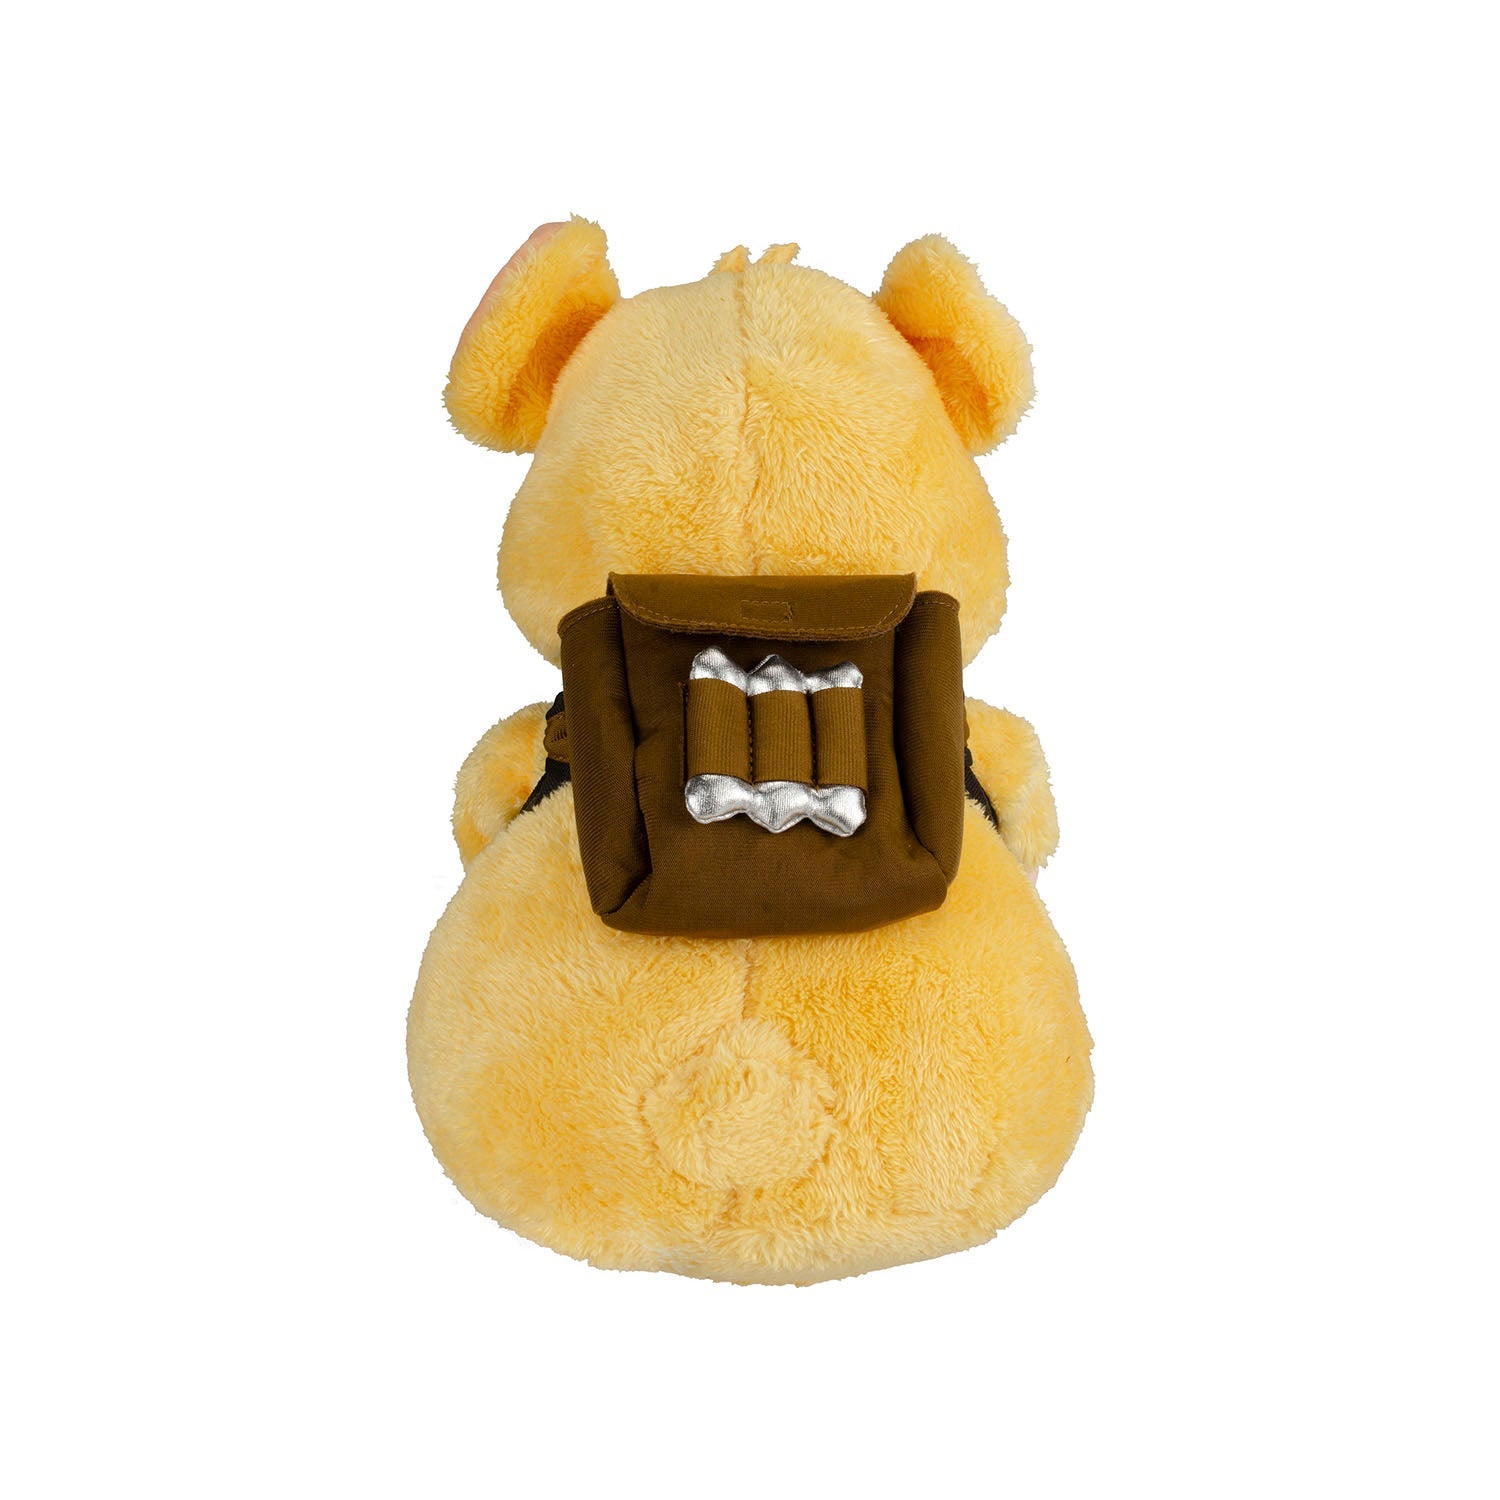 Overwatch Wrecking Ball Plush Toy in Tan - Back View